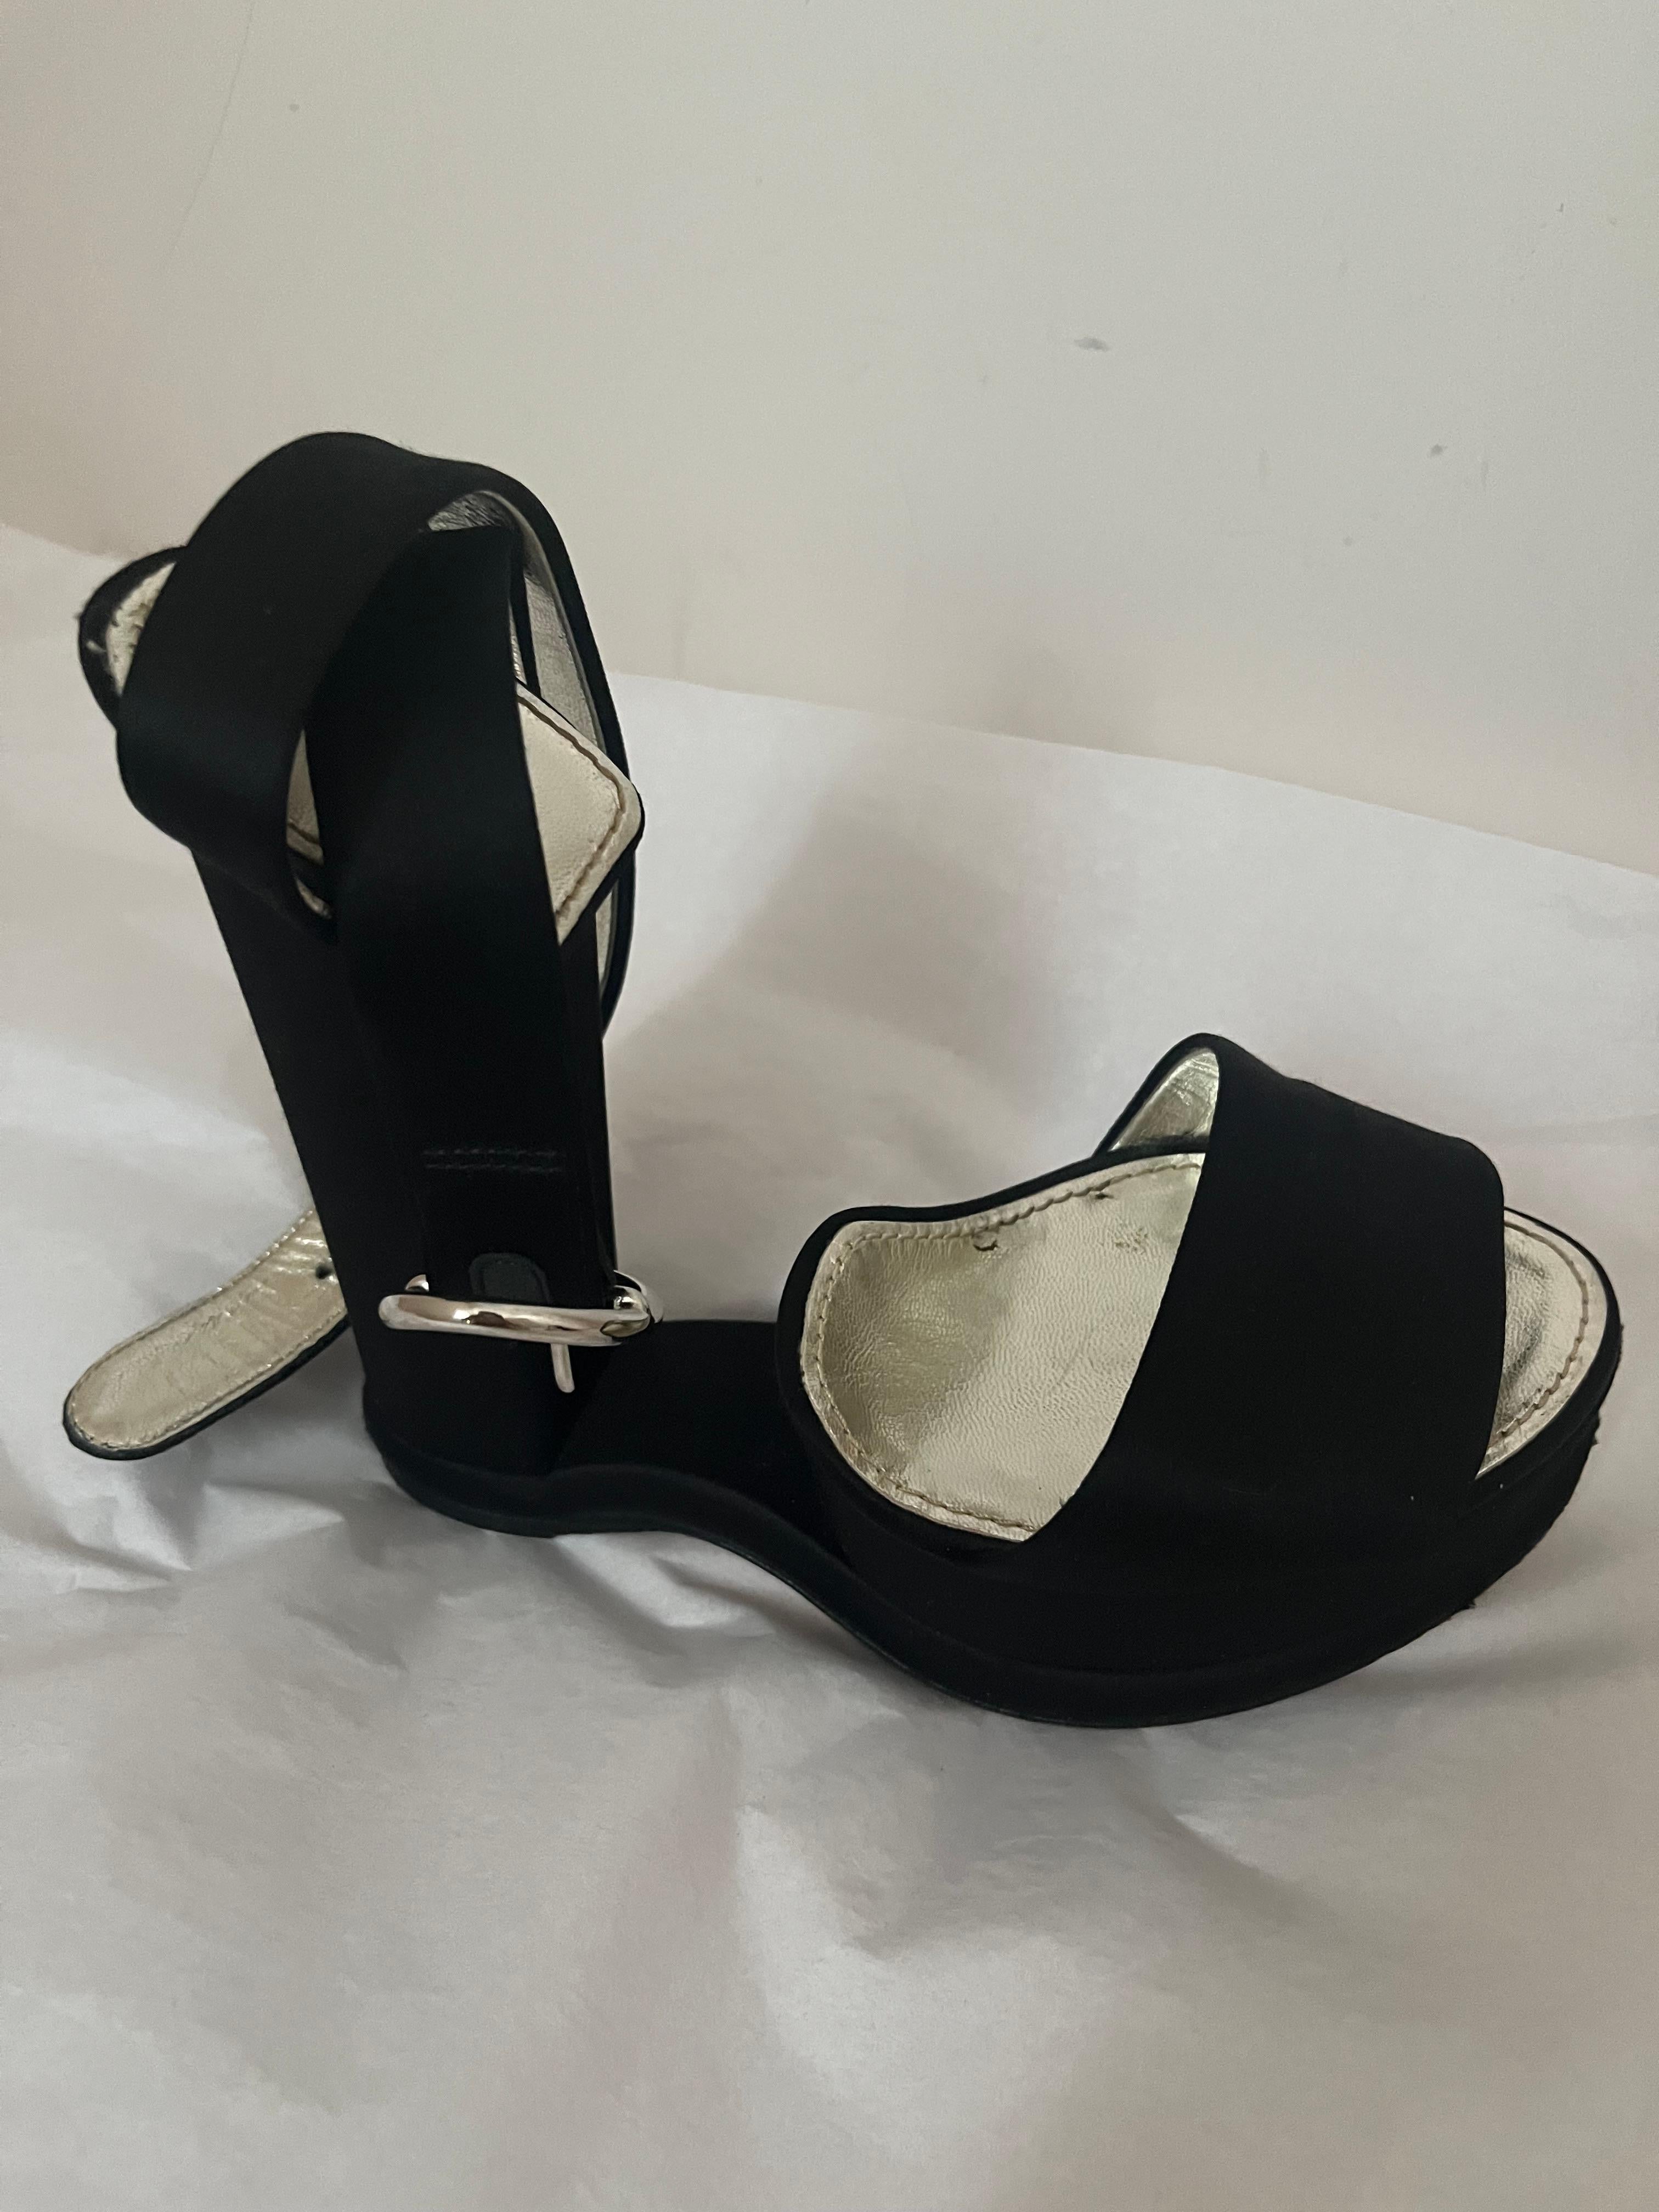 What is special about this black satin with the ankle strap and peep toe is of course the inverted heel. The molded sole gives you the almost flat feel, but wear them and you are wearing heels (6